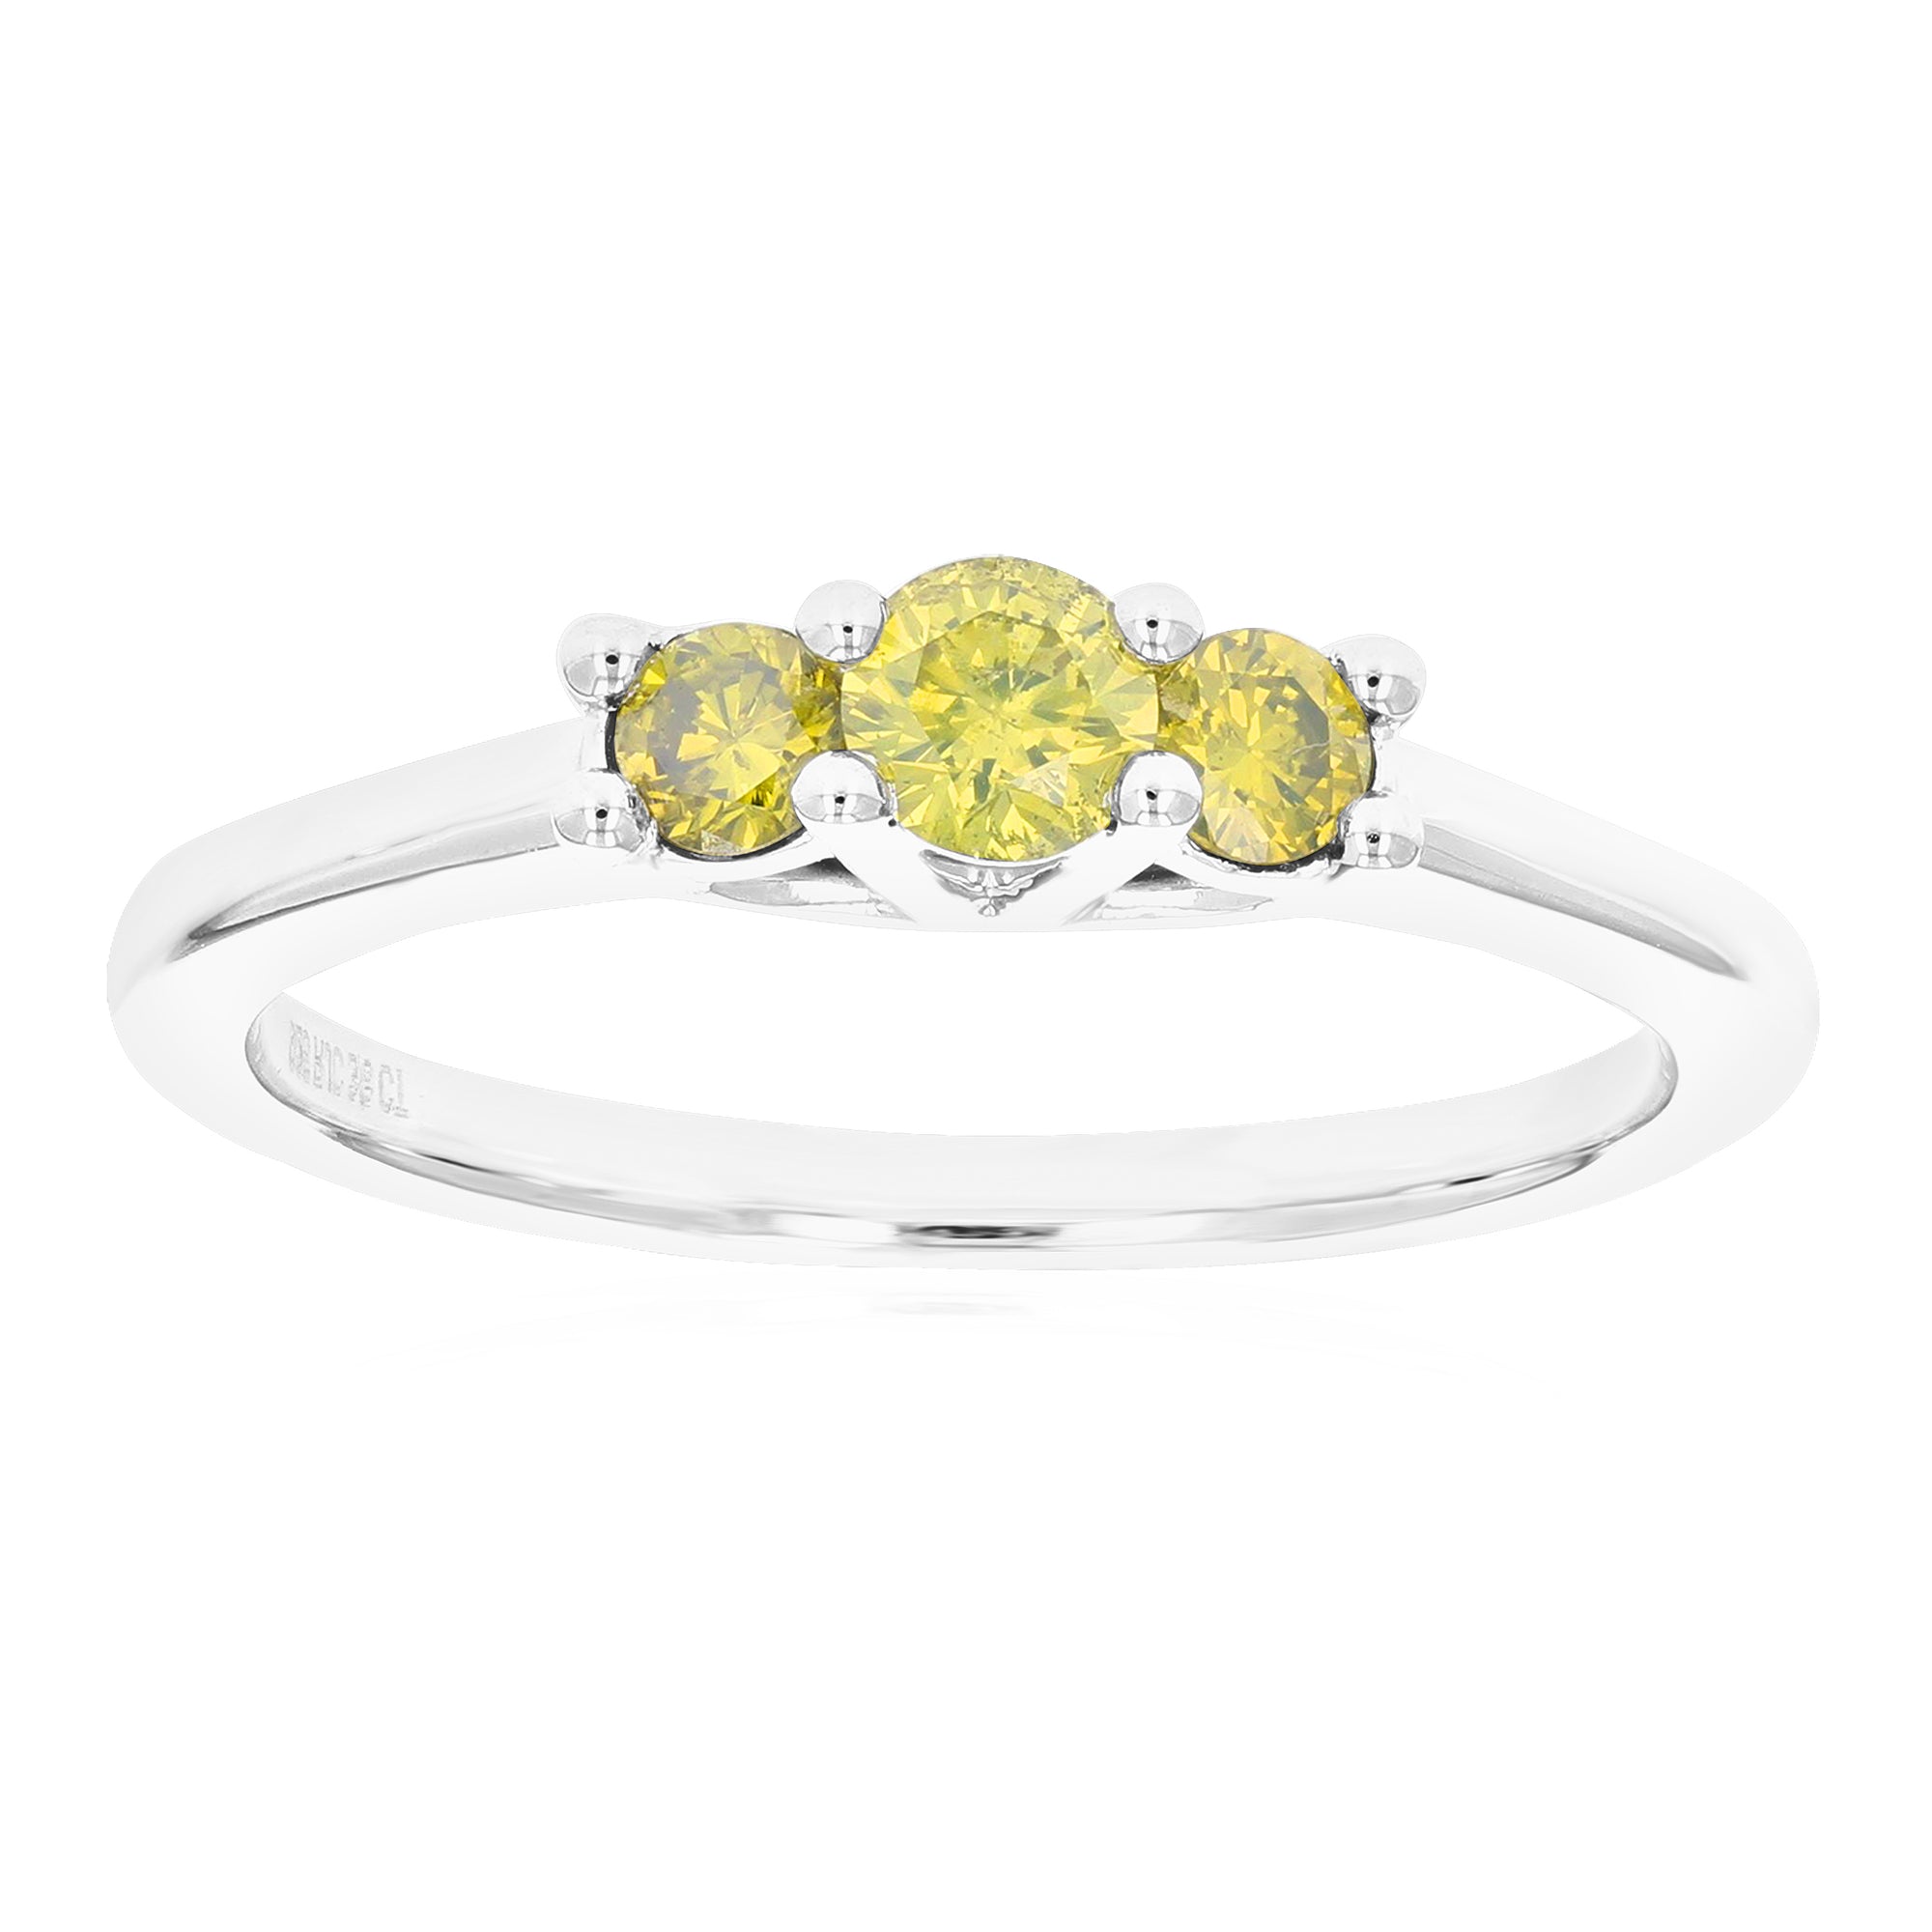 3/8 cttw 3 Stone Round Yellow Diamond Engagement Ring .925 Sterling Silver Prong Set